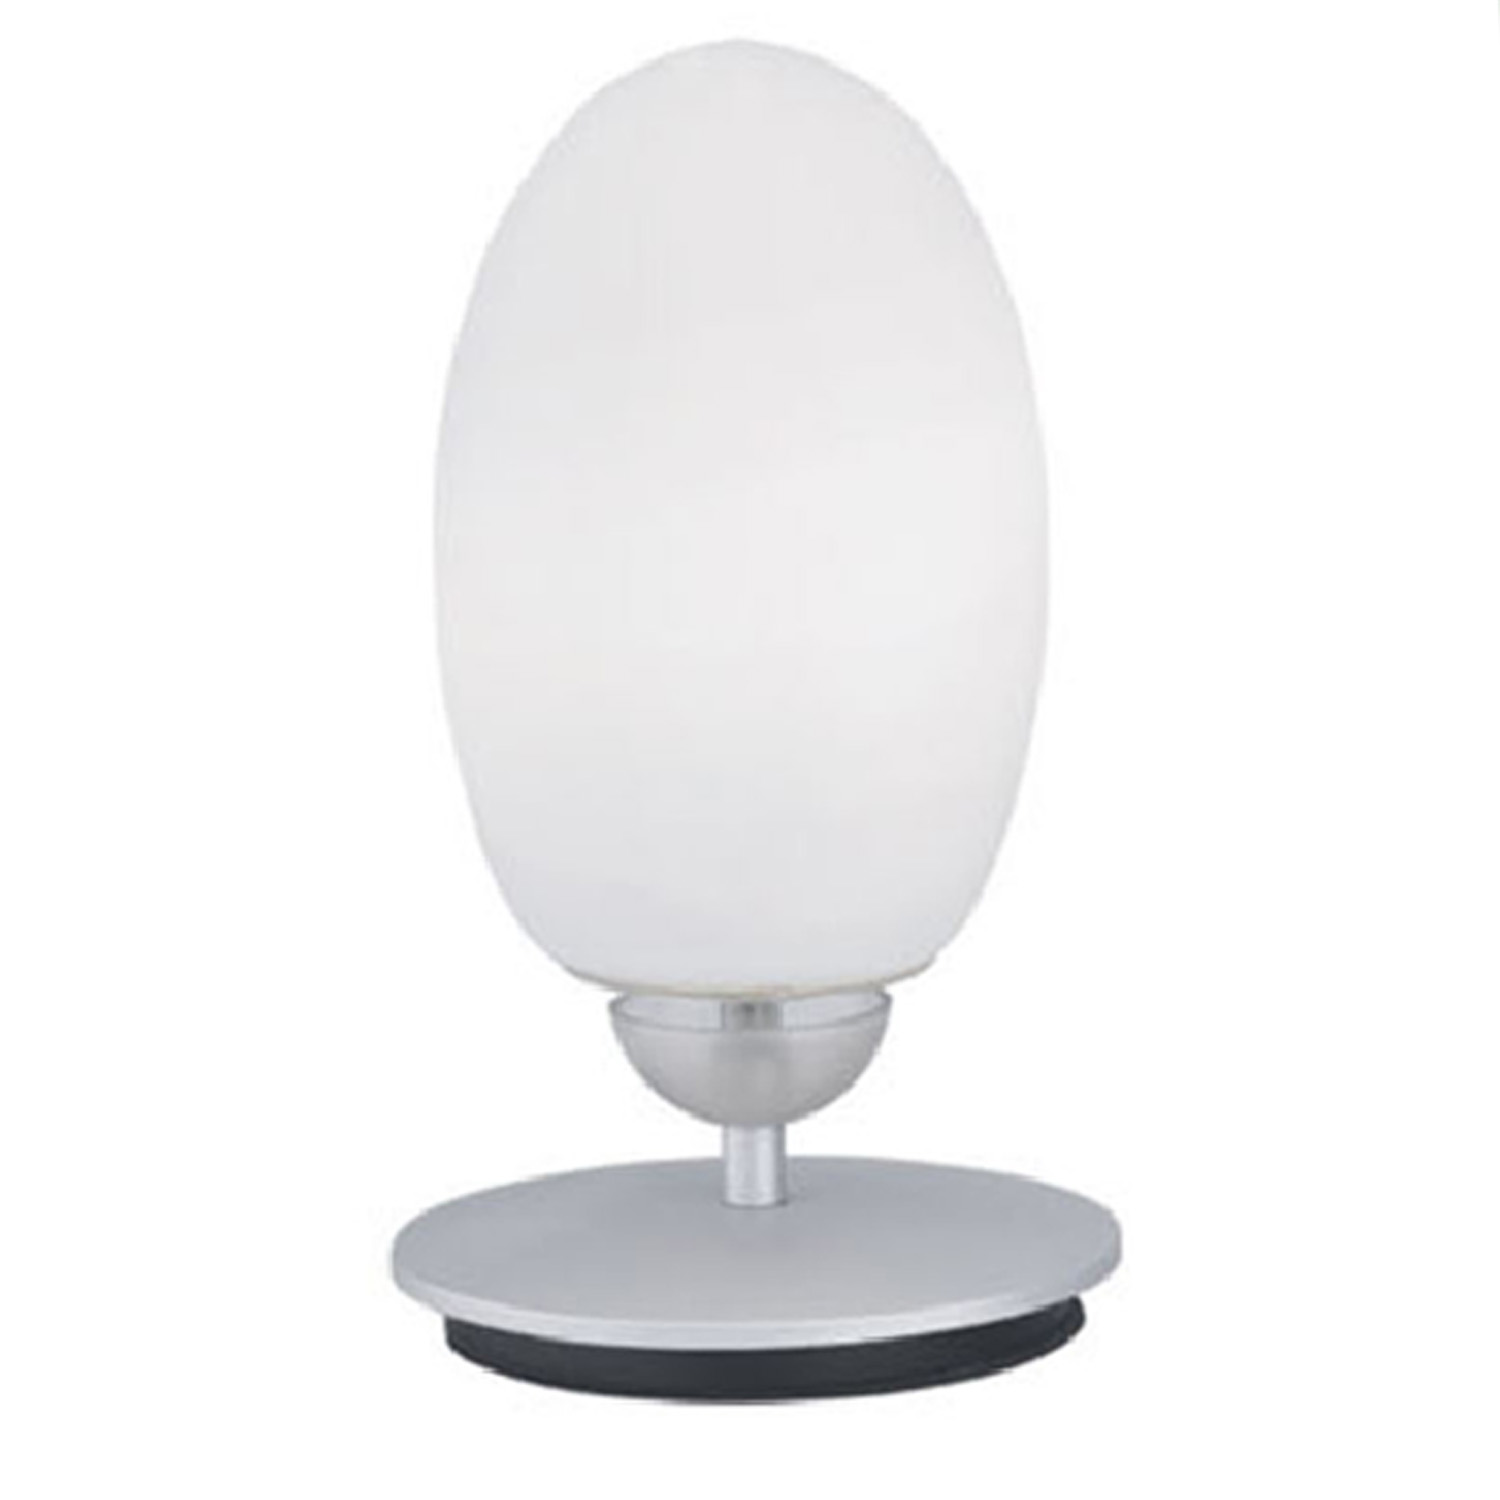 Room decoration table lamp DT035-1.Item No.DT035                    2.Room decoration table lamp DT035                    3.Good quality with very competitive price               4. ODM, OEM and buyer label service available, safe packing, gift box available per request.